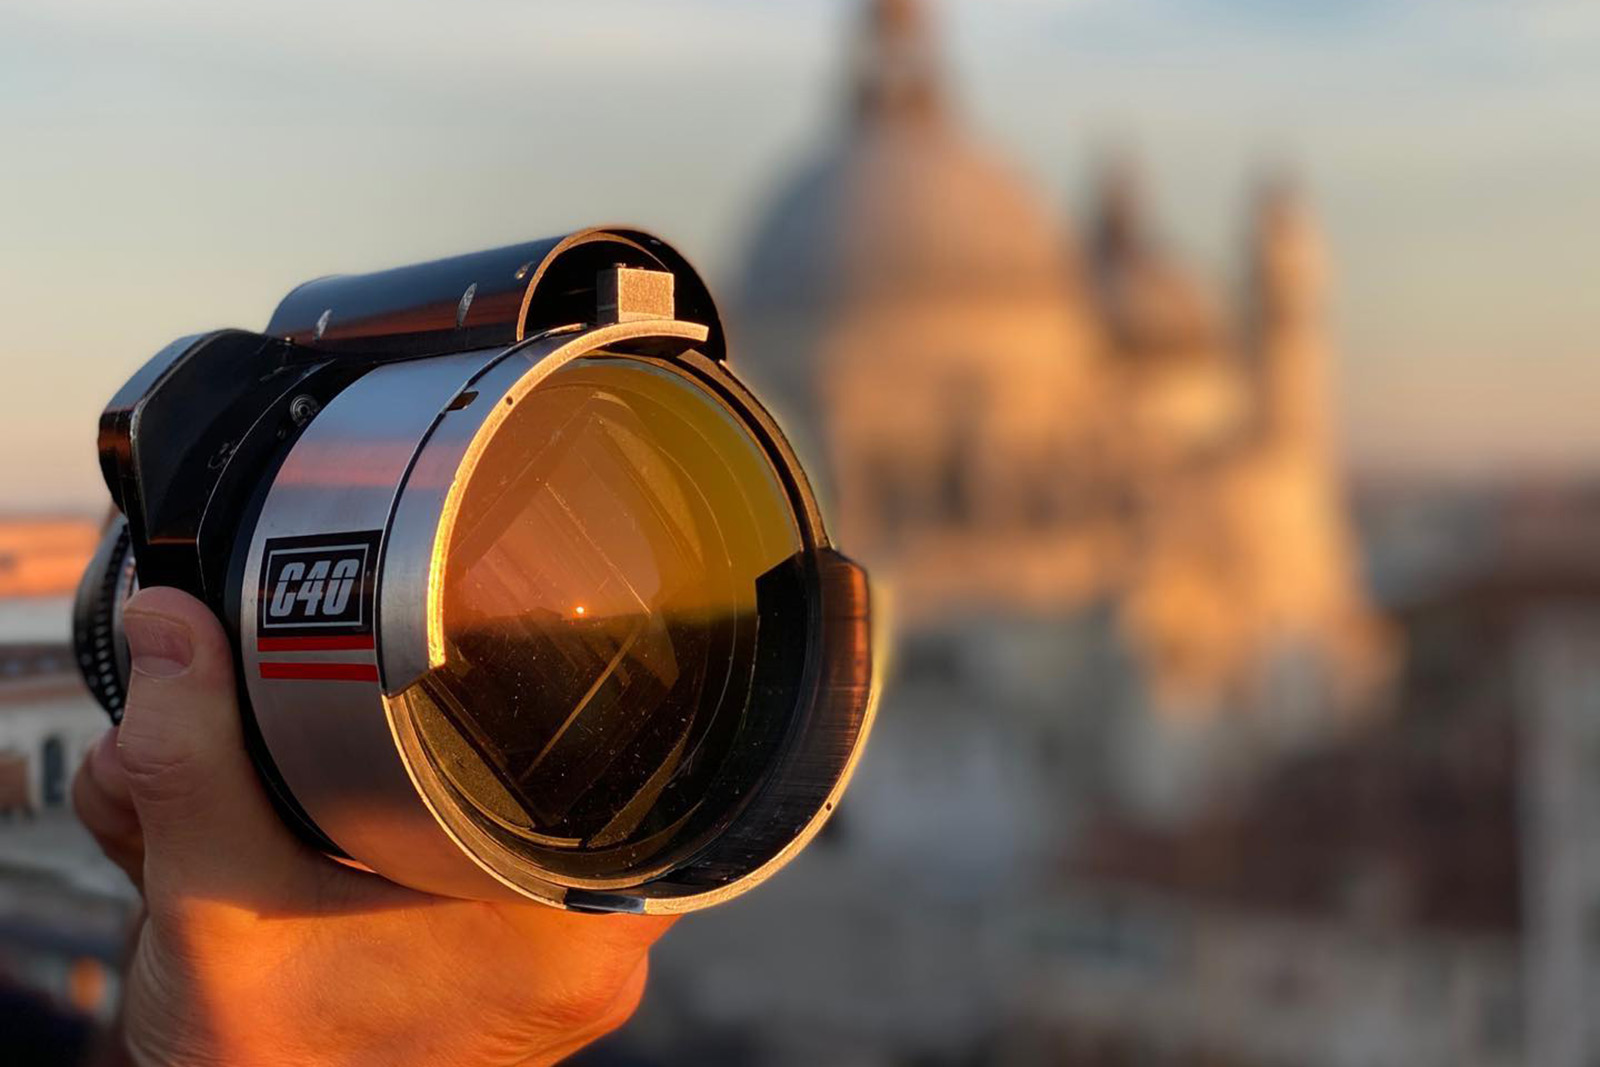 Panavision C40 lens used on the Venice shoot of M:I7